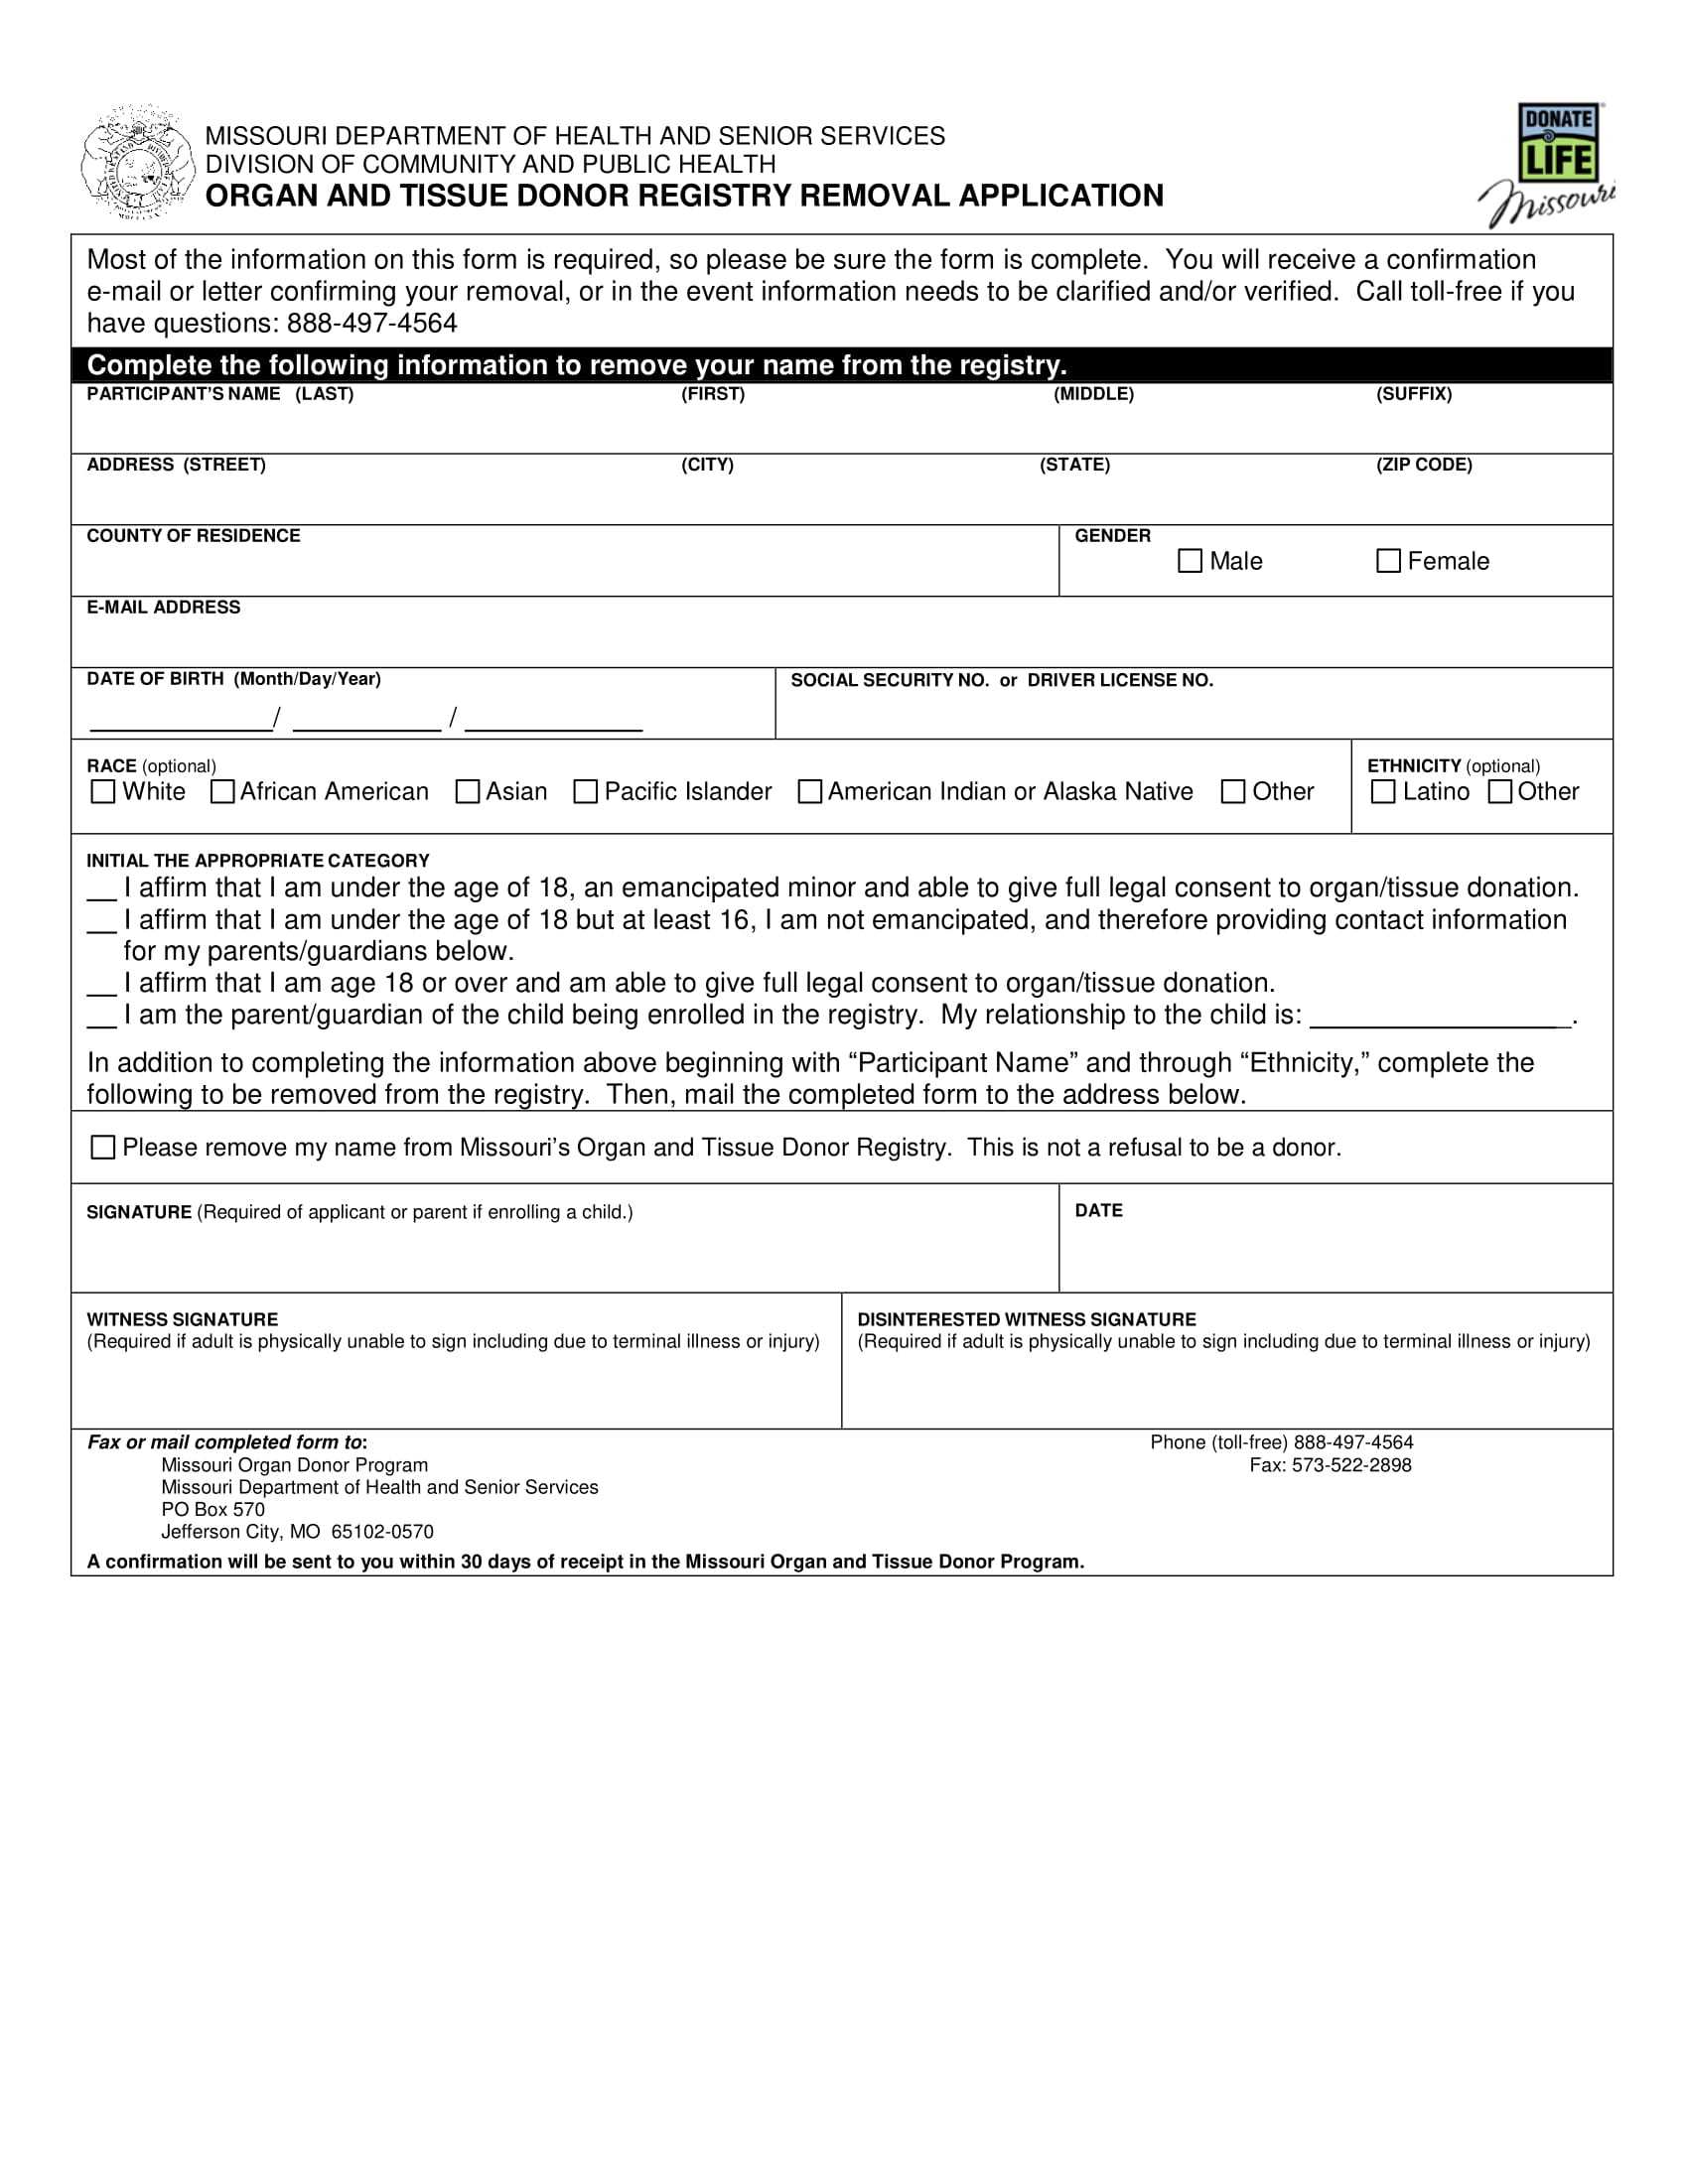 Free Refuse Organ Donation Form | Pdf With Organ Donor Card Template